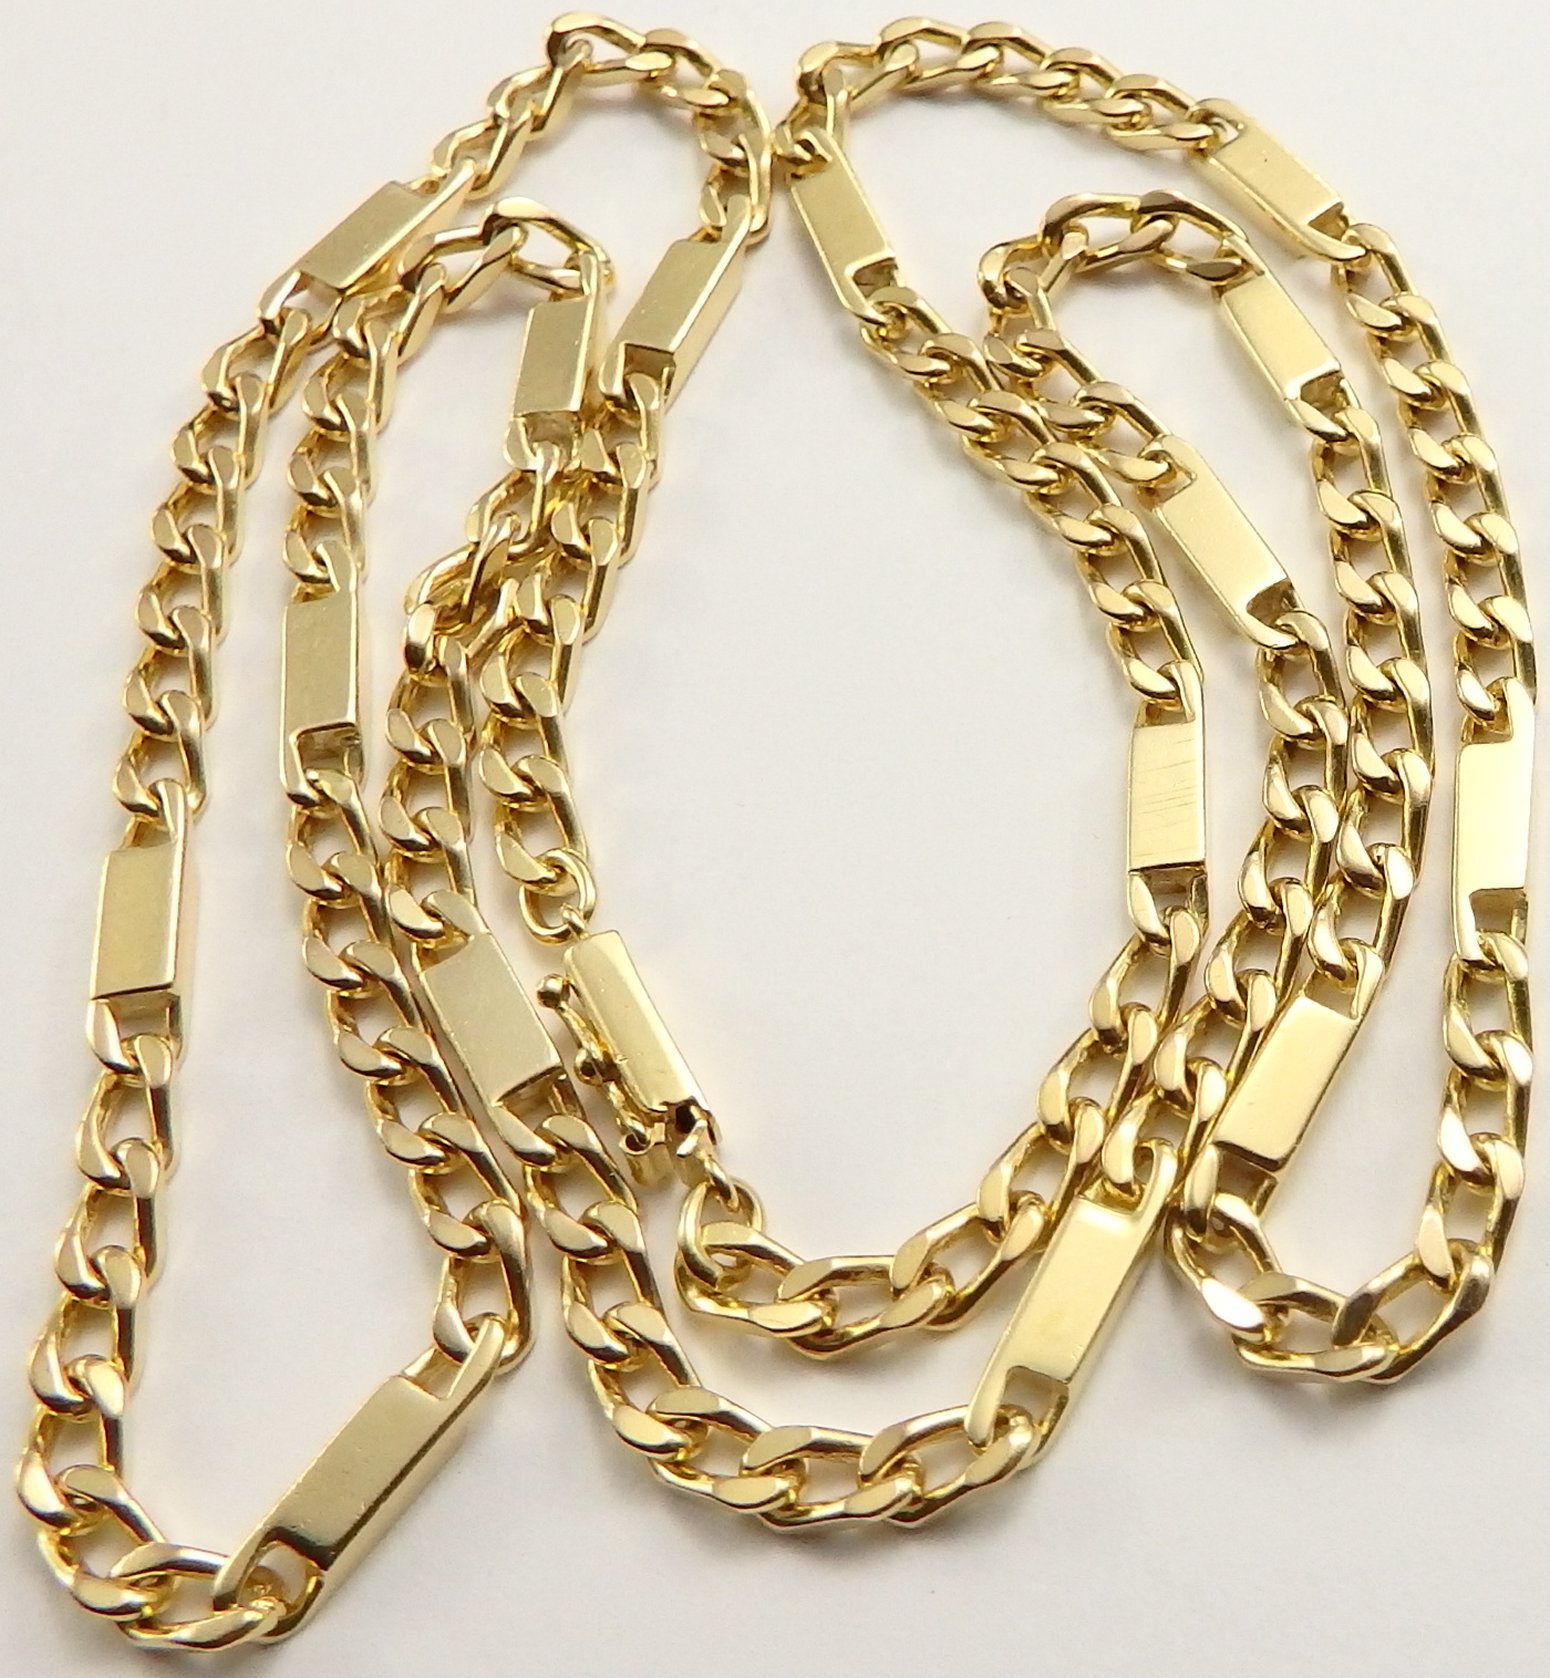 Heavy 9 carat solid gold 29 inch long yellow gold neck chain weighs 43. ...